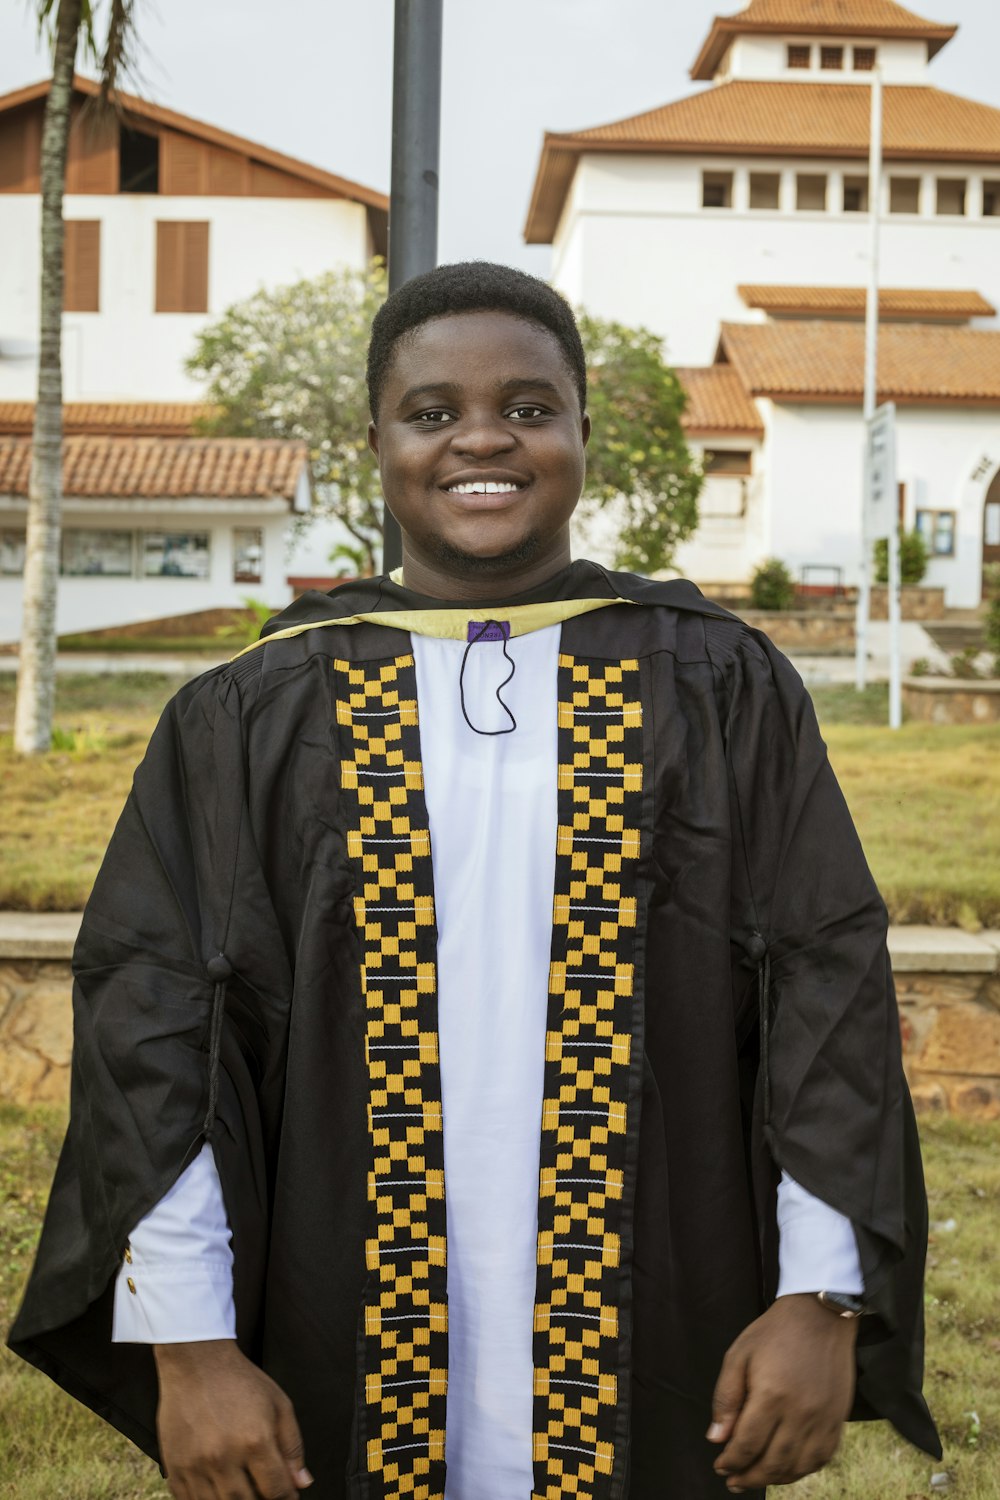 boy in black and yellow academic dress